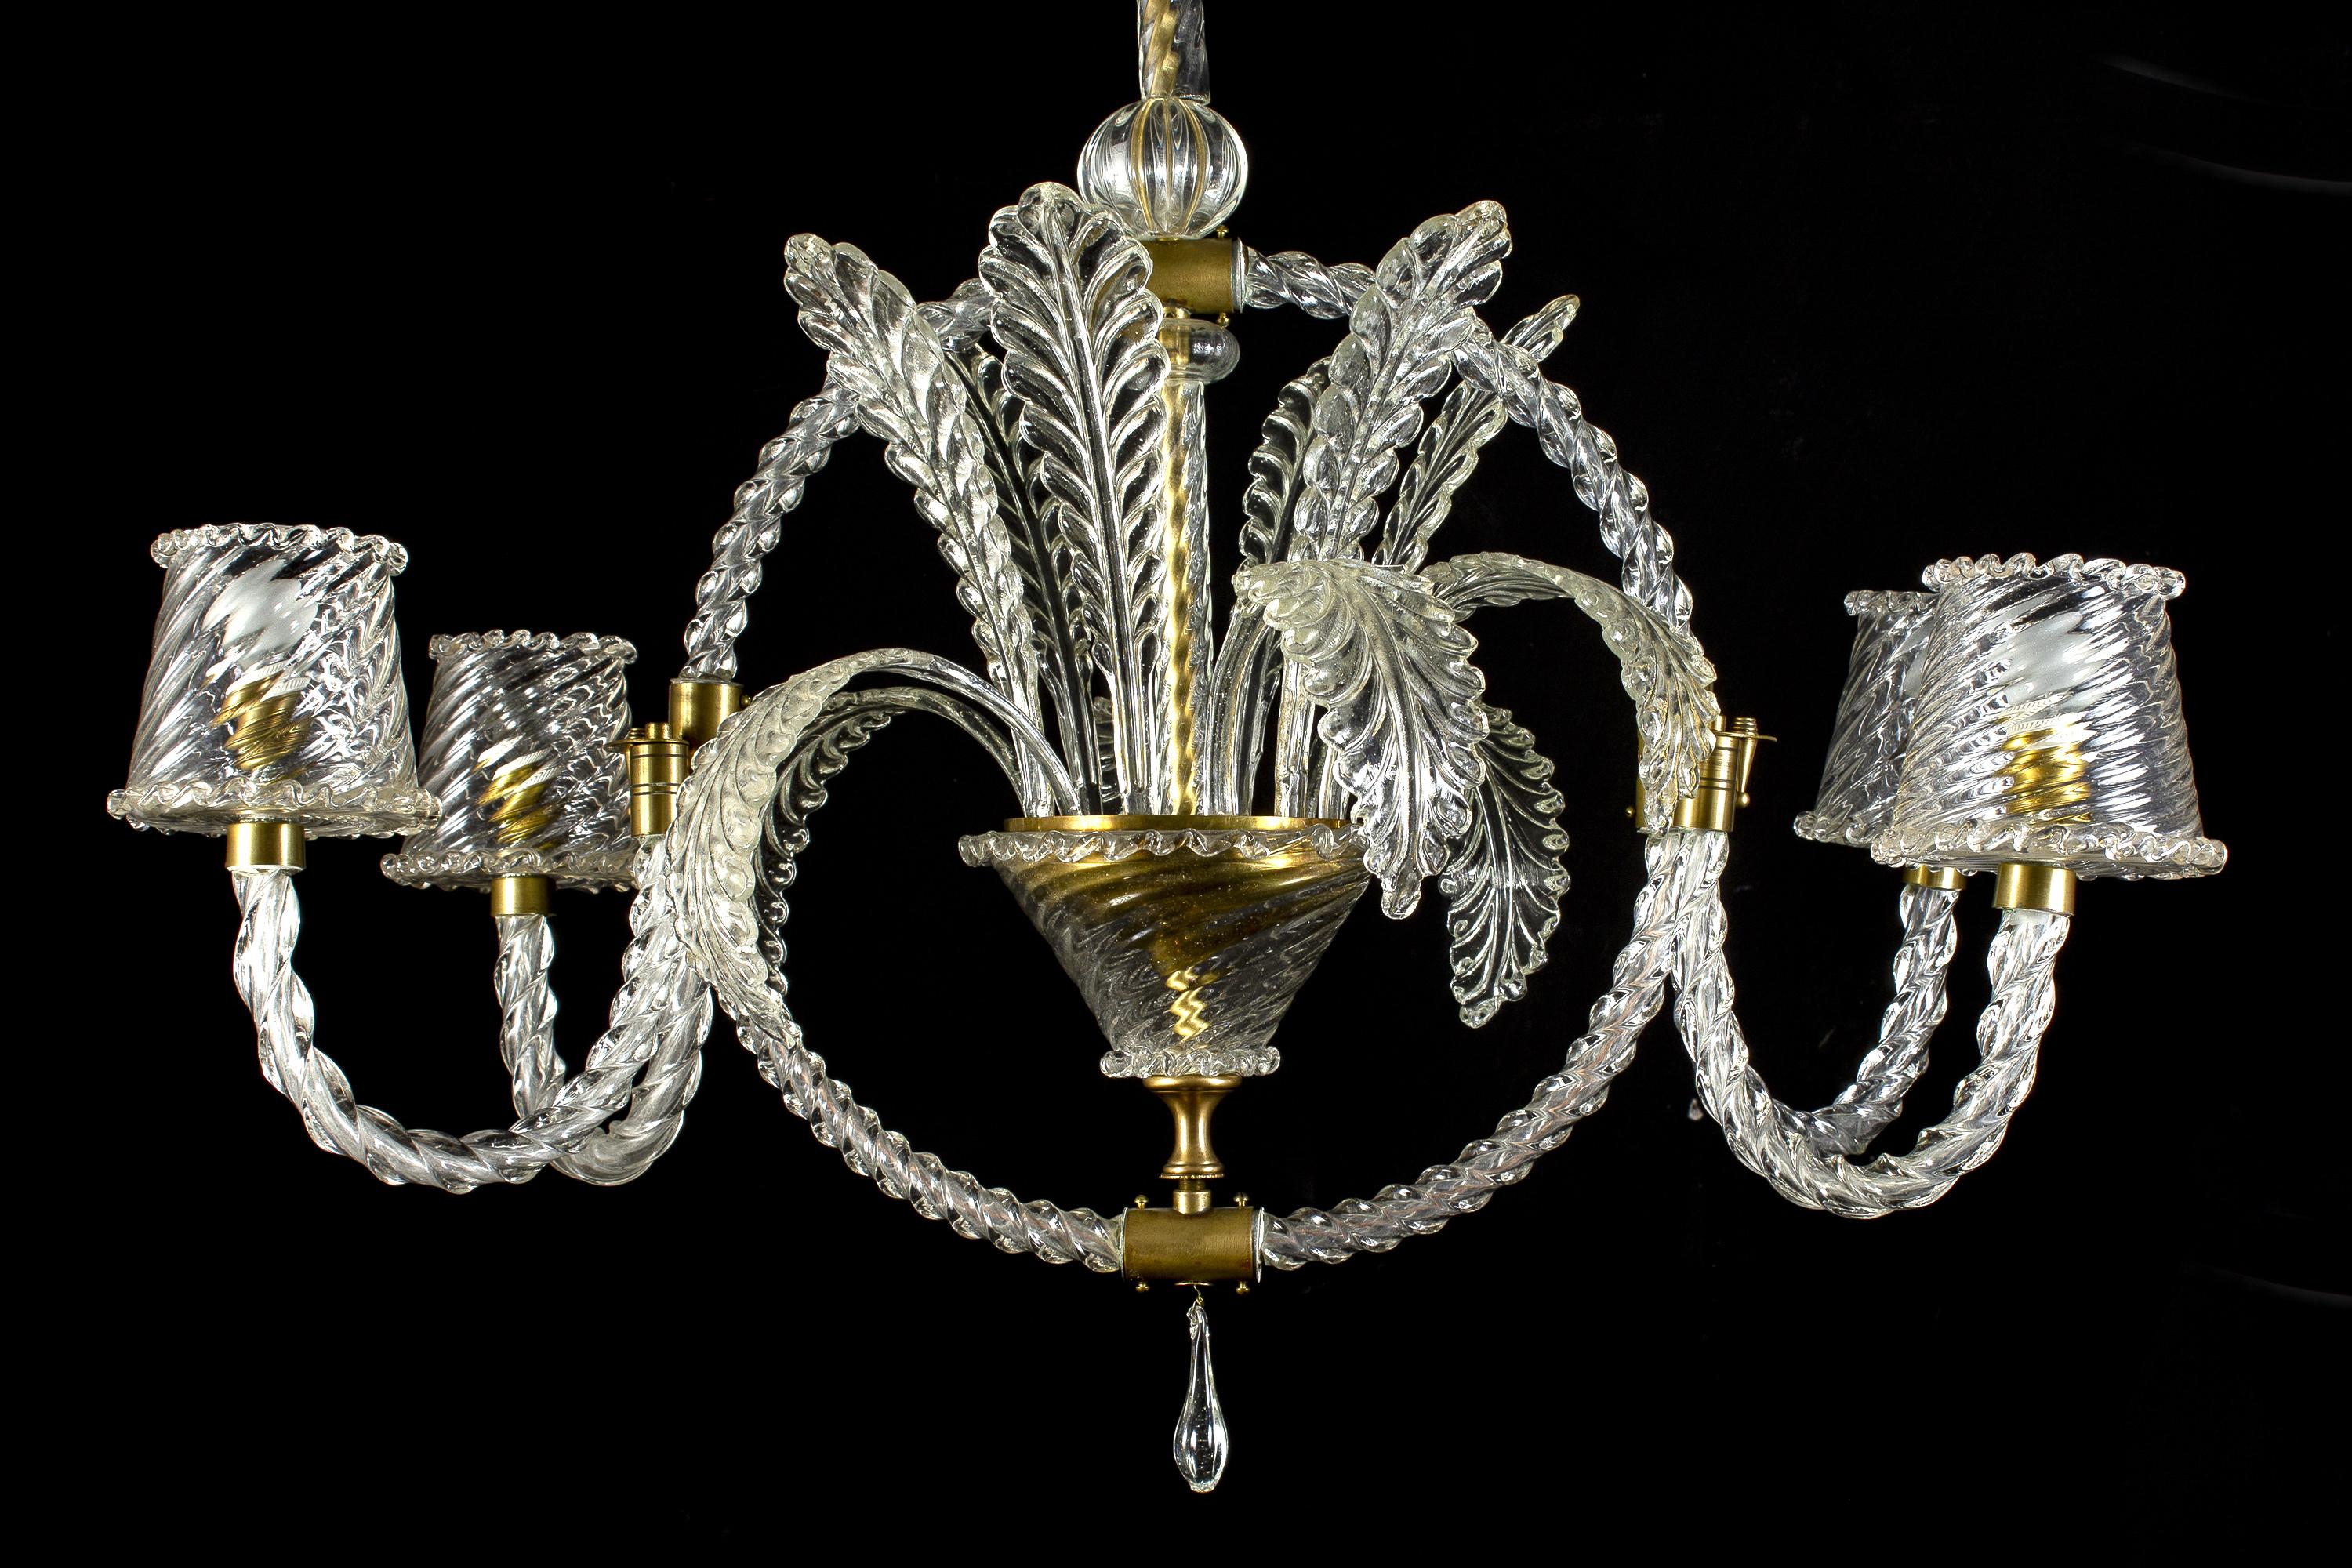 Majestic Art Deco hand blown Murano chandelier by Ercole Barovier, circa 1940.
Four E 27 light bulbs. We can rewire for your country standards.